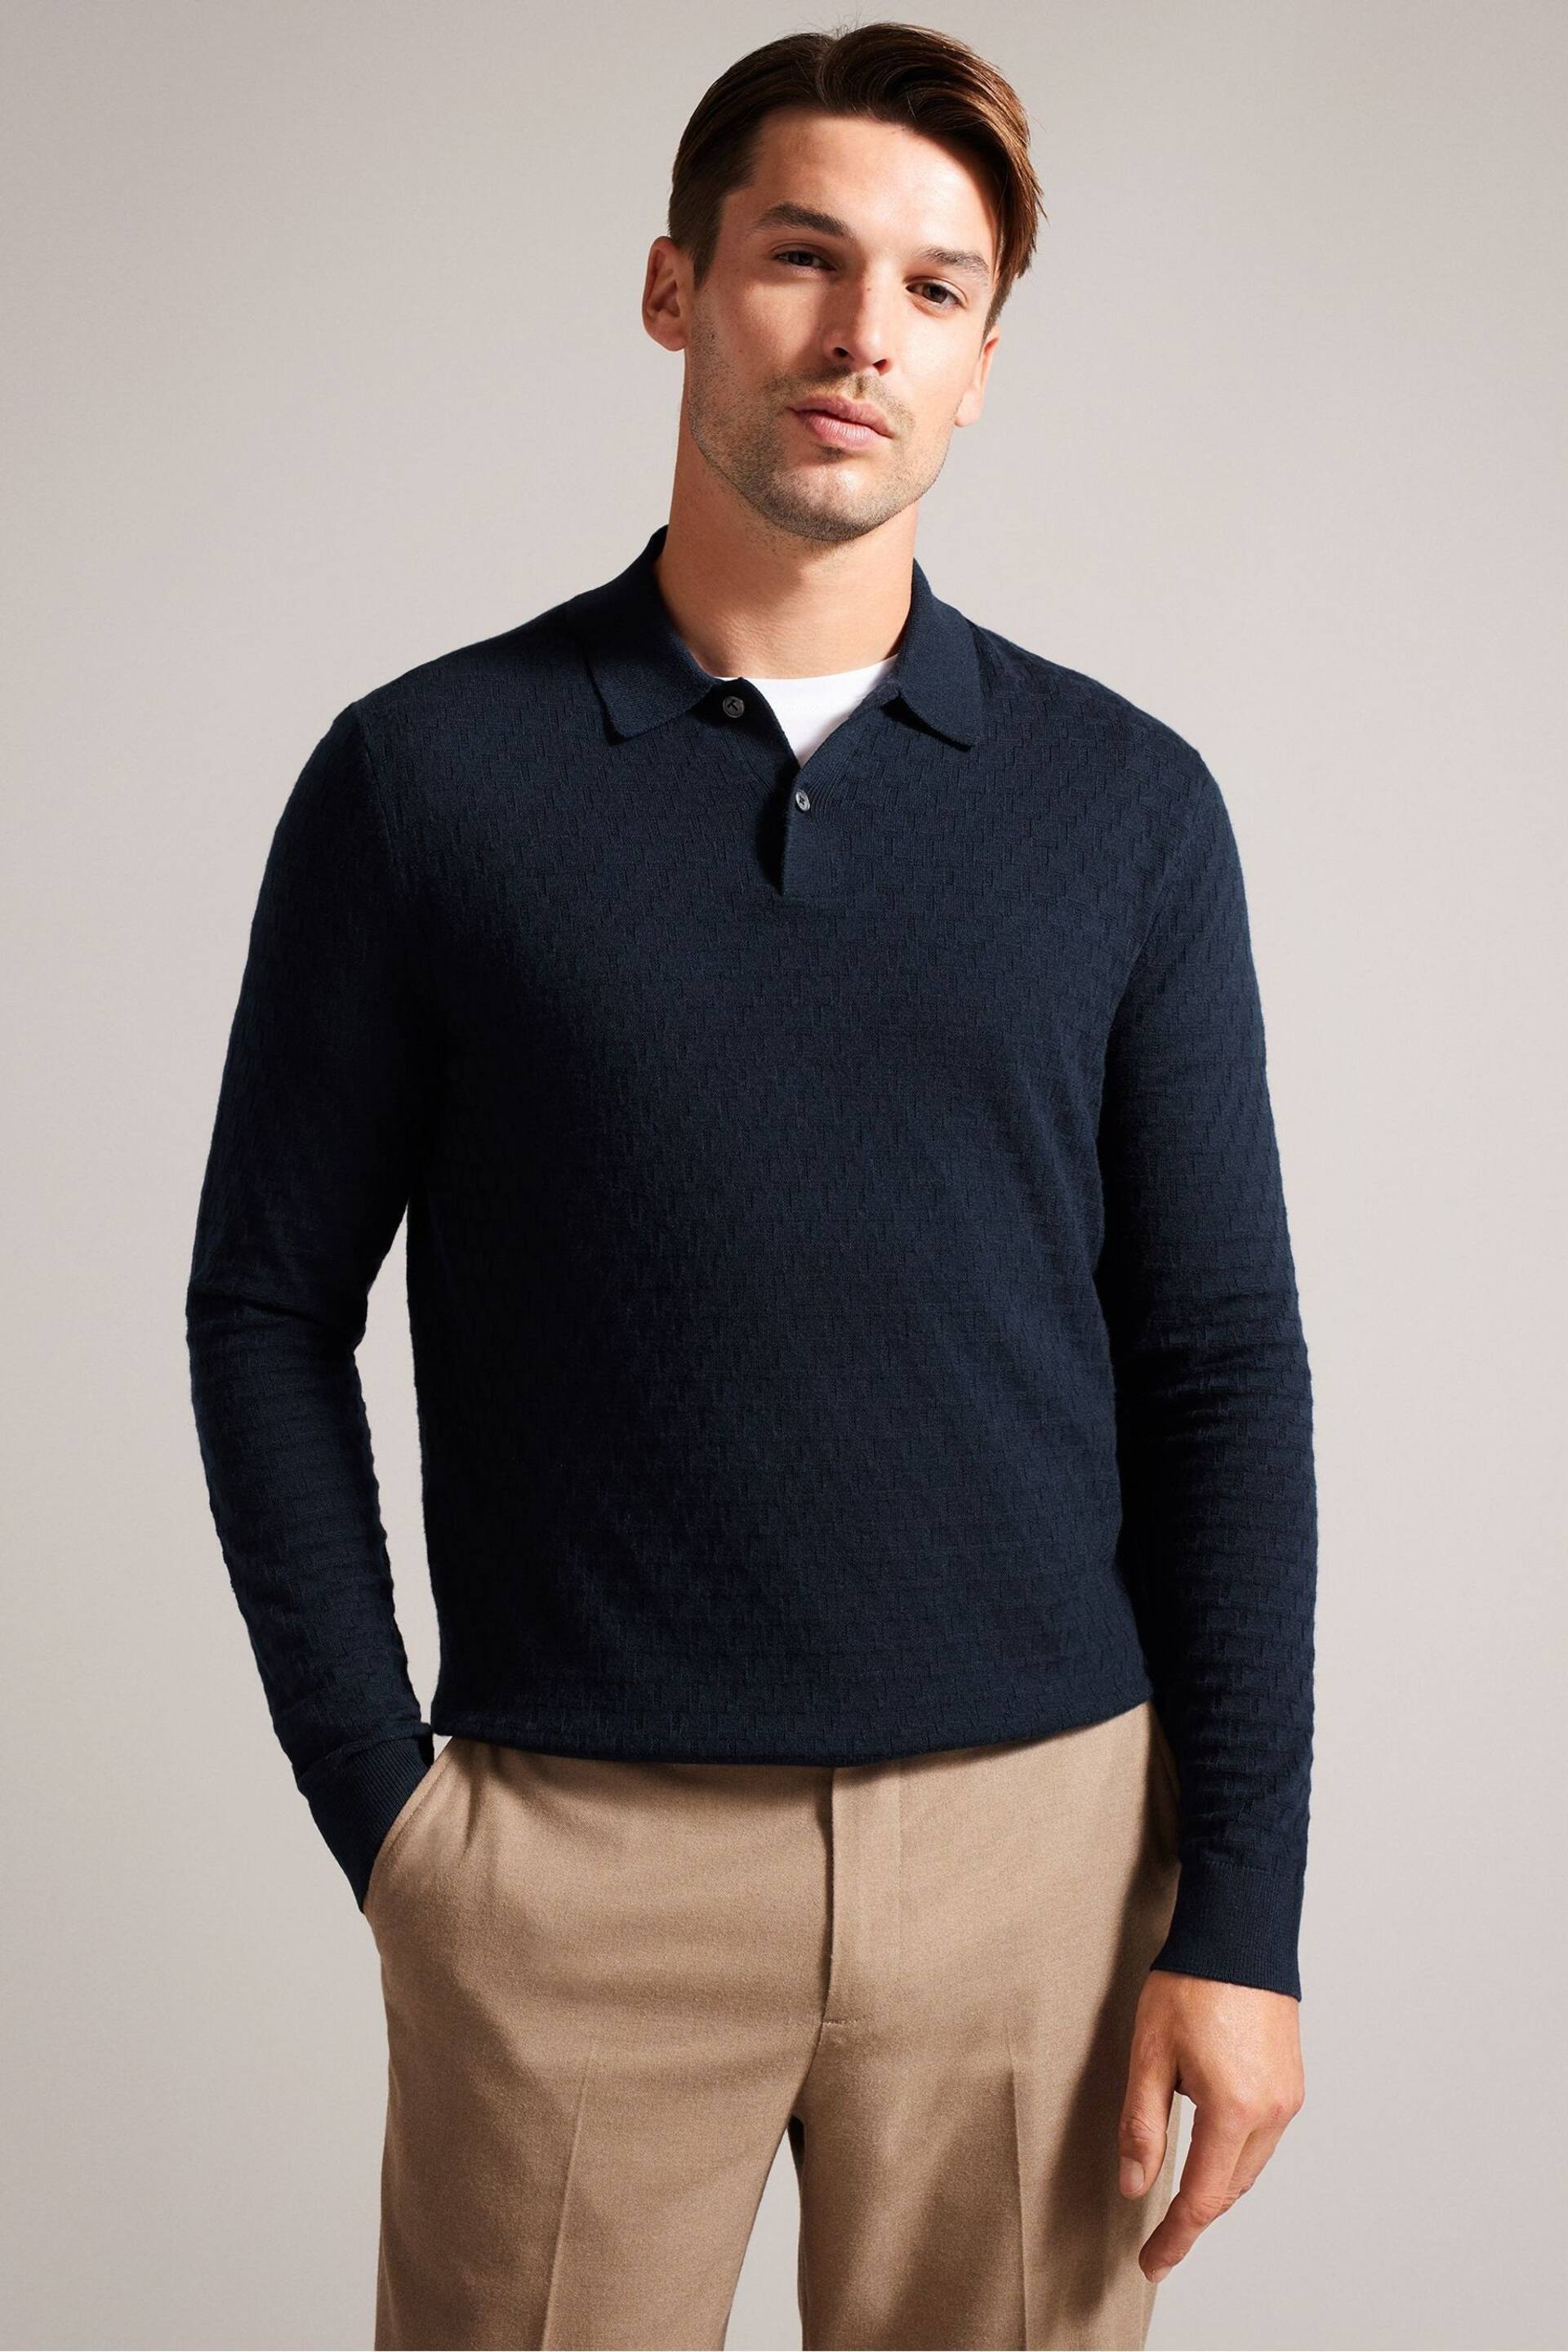 Ted Baker Blue Morar Stitch Knitted Polo Shirt - Image 1 of 6